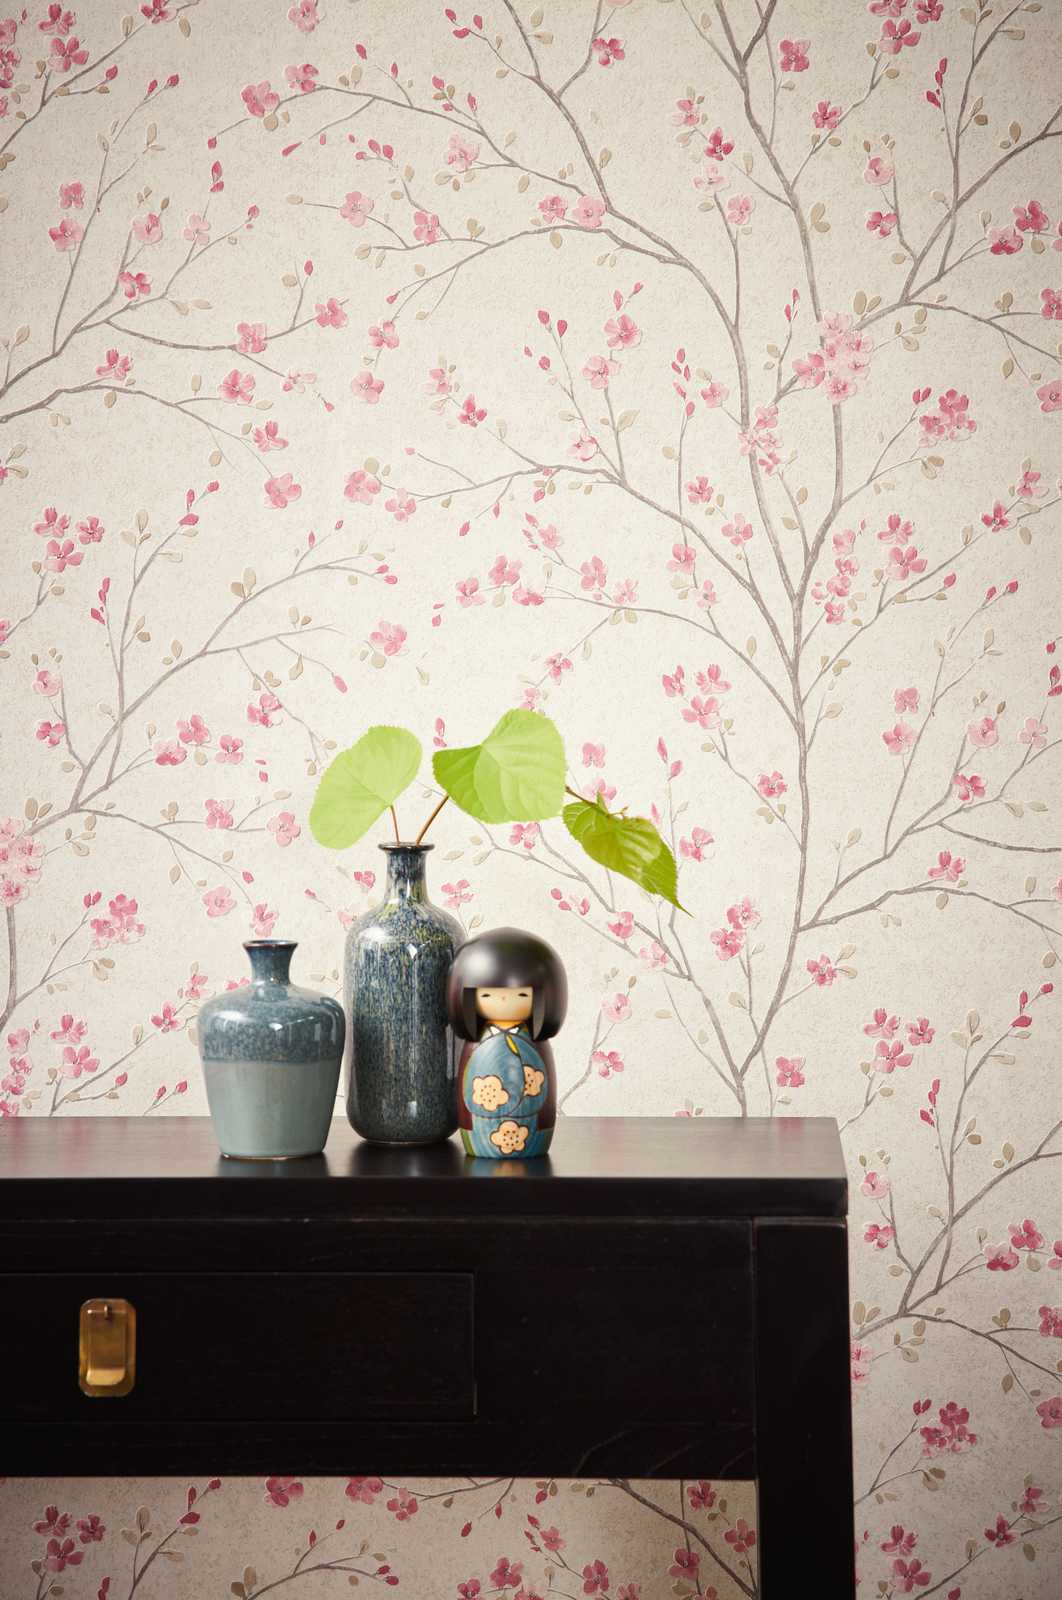             Non-woven wallpaper with cherry blossom design in Asian style - brown, pink, white
        